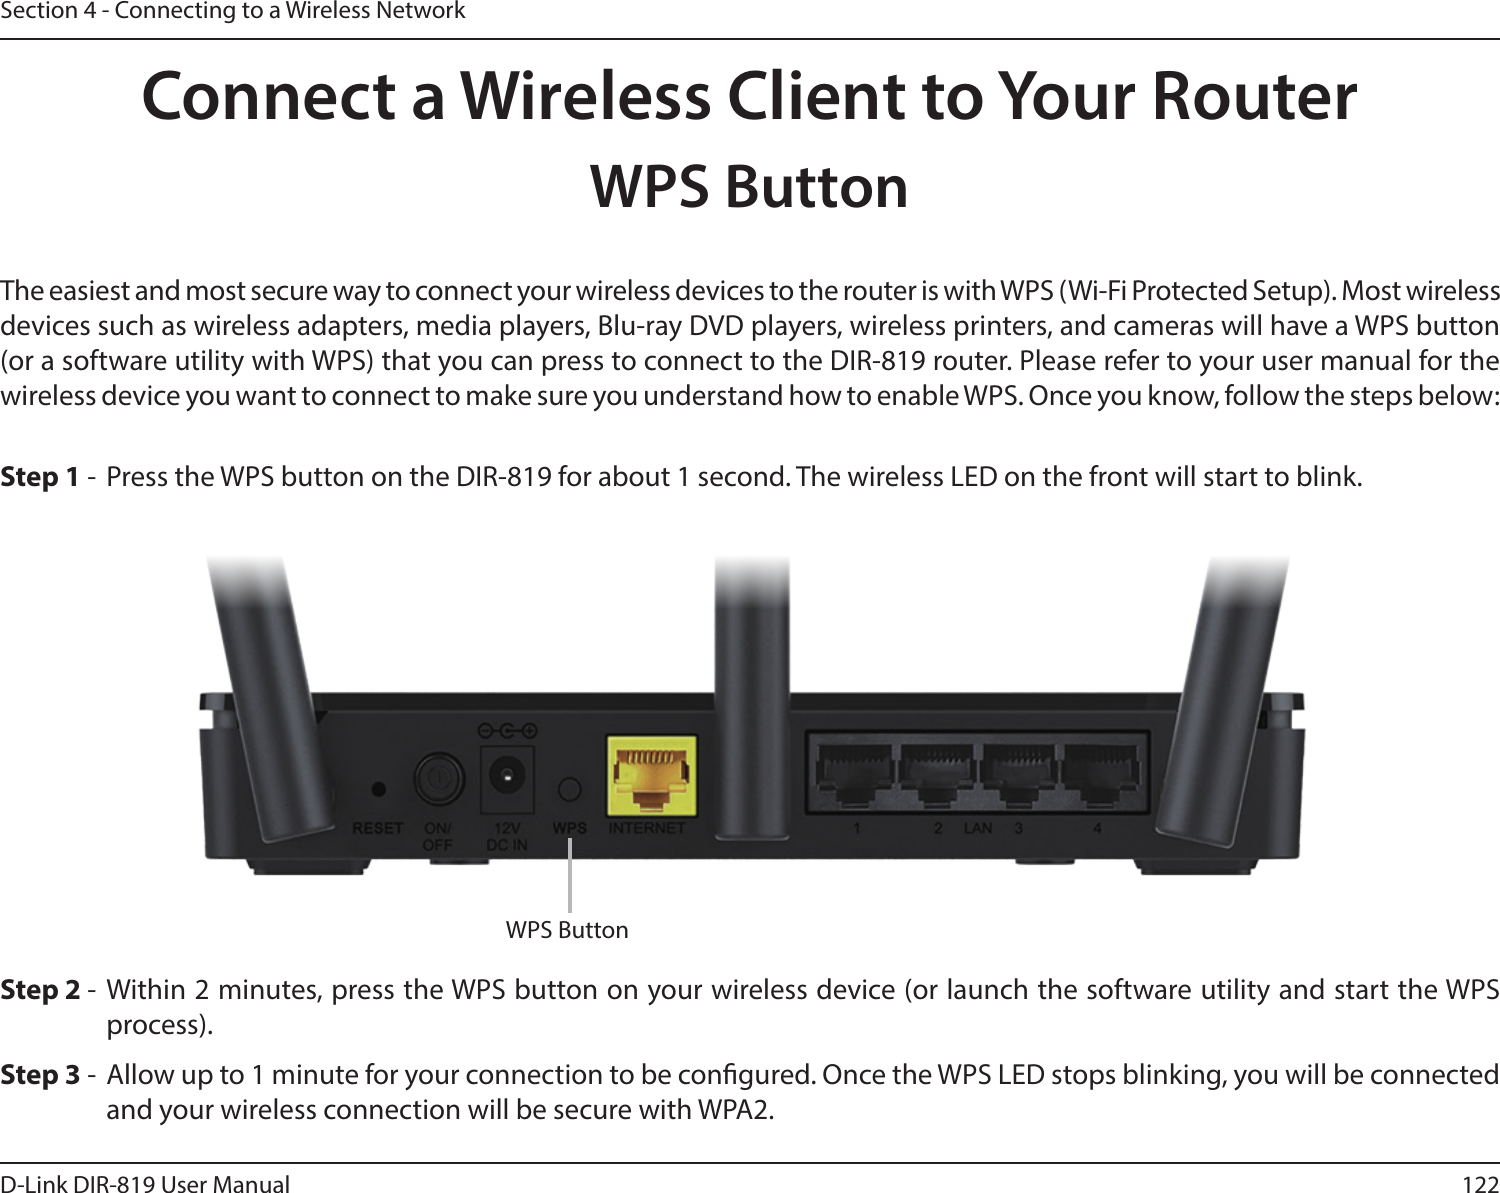 122D-Link DIR-819 User ManualSection 4 - Connecting to a Wireless NetworkConnect a Wireless Client to Your RouterWPS ButtonStep 2 - Within 2 minutes, press the WPS button on your wireless device (or launch the software utility and start the WPS process).The easiest and most secure way to connect your wireless devices to the router is with WPS (Wi-Fi Protected Setup). Most wireless devices such as wireless adapters, media players, Blu-ray DVD players, wireless printers, and cameras will have a WPS button (or a software utility with WPS) that you can press to connect to the DIR-819 router. Please refer to your user manual for the wireless device you want to connect to make sure you understand how to enable WPS. Once you know, follow the steps below:Step 1 -  Press the WPS button on the DIR-819 for about 1 second. The wireless LED on the front will start to blink.Step 3 -  Allow up to 1 minute for your connection to be congured. Once the WPS LED stops blinking, you will be connected and your wireless connection will be secure with WPA2.WPS Button